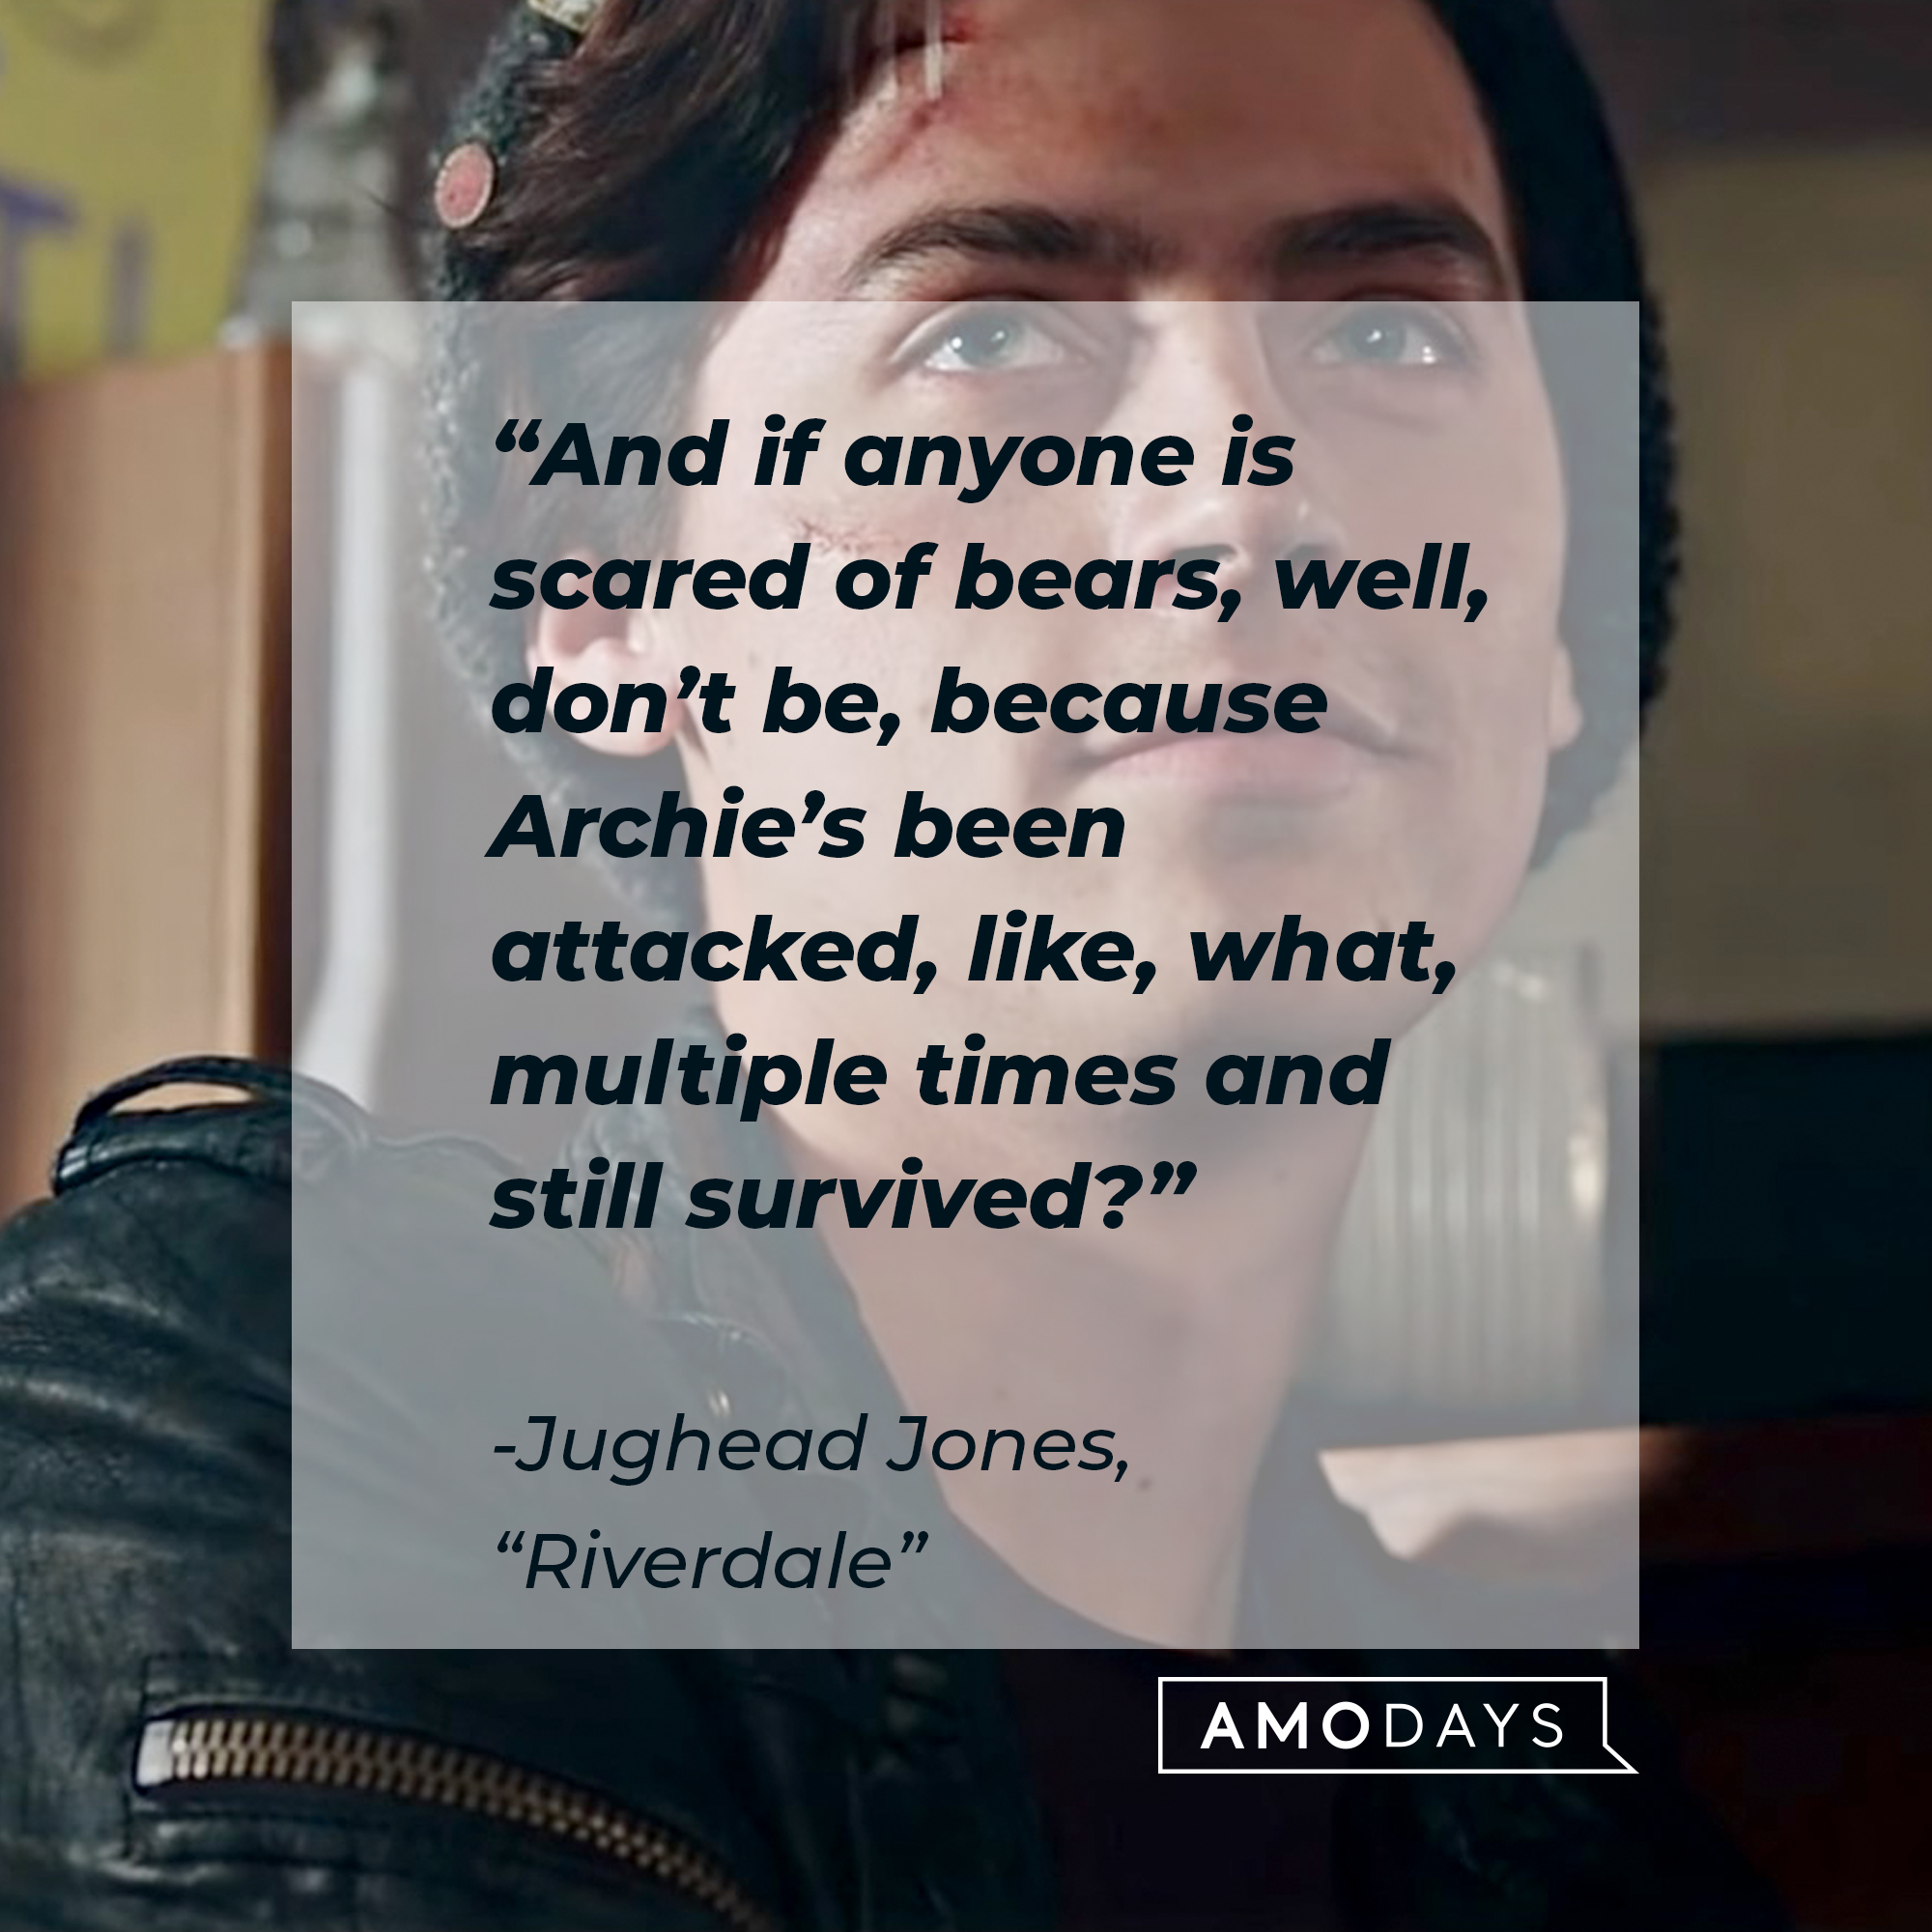 Image of Cole Sprouse as Judhead Jones in "Riverdale" with the quote: “And if anyone is scared of bears, well, don’t be, because Archie’s been attacked, like, what, multiple times and still survived?” | Source: facebook.com/Riverdale